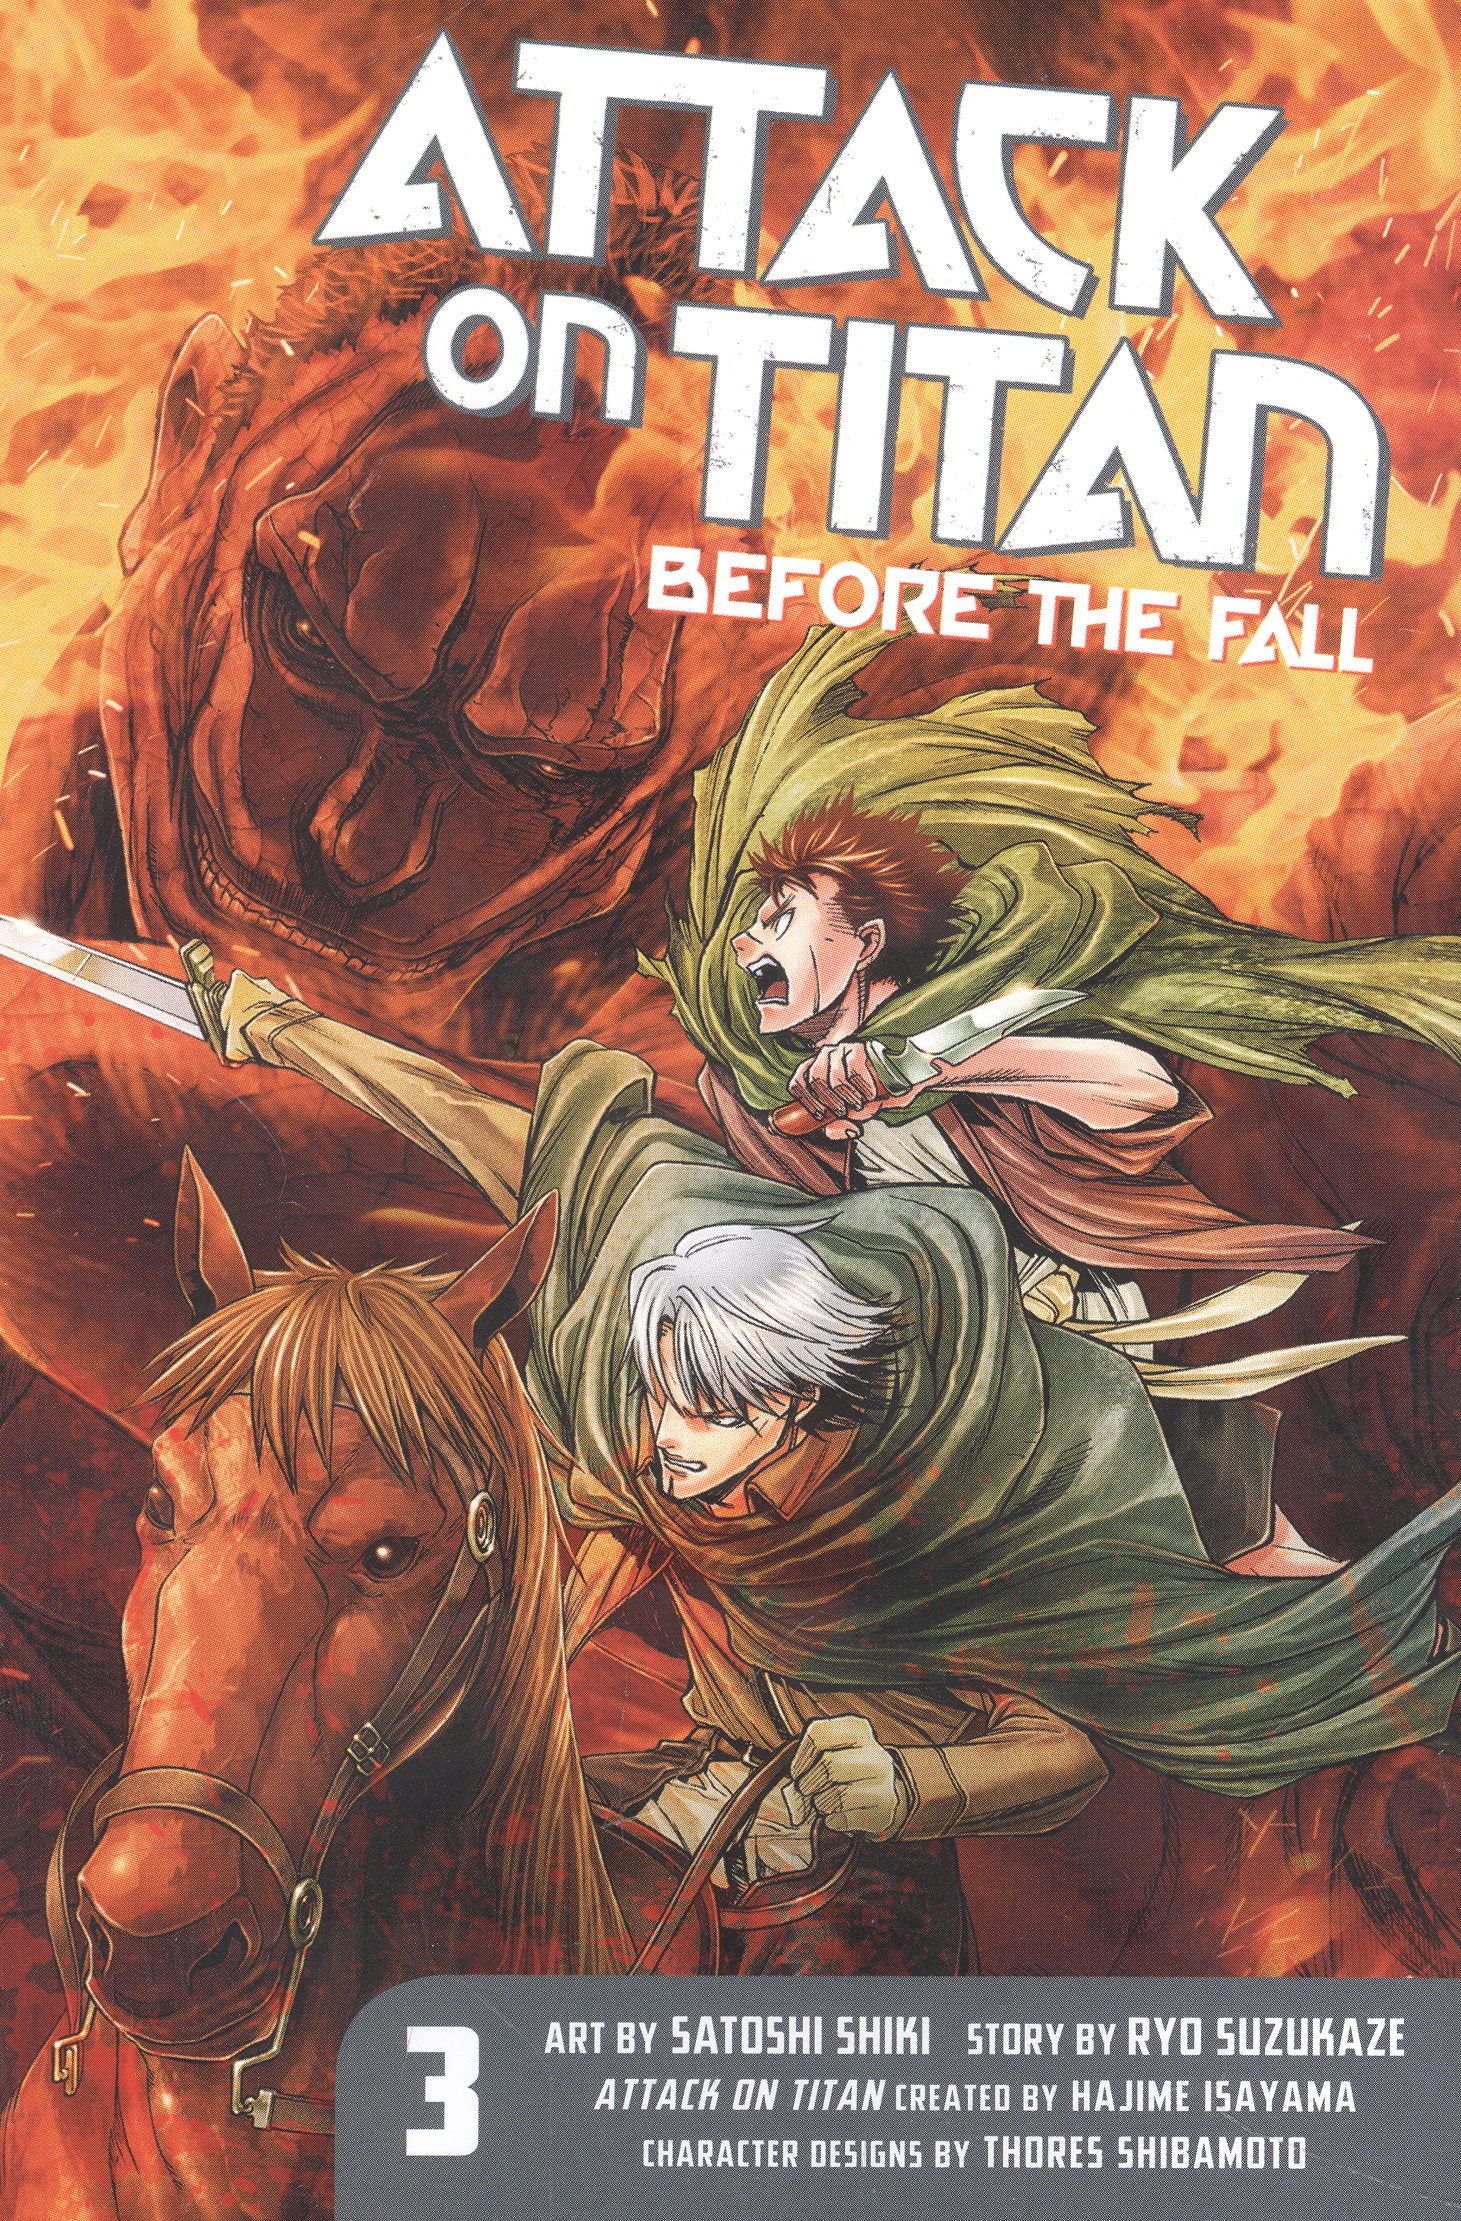 Isayama Hajime Attack on Titan: Before the Fall 3 achebe chinua the education of a british protected child